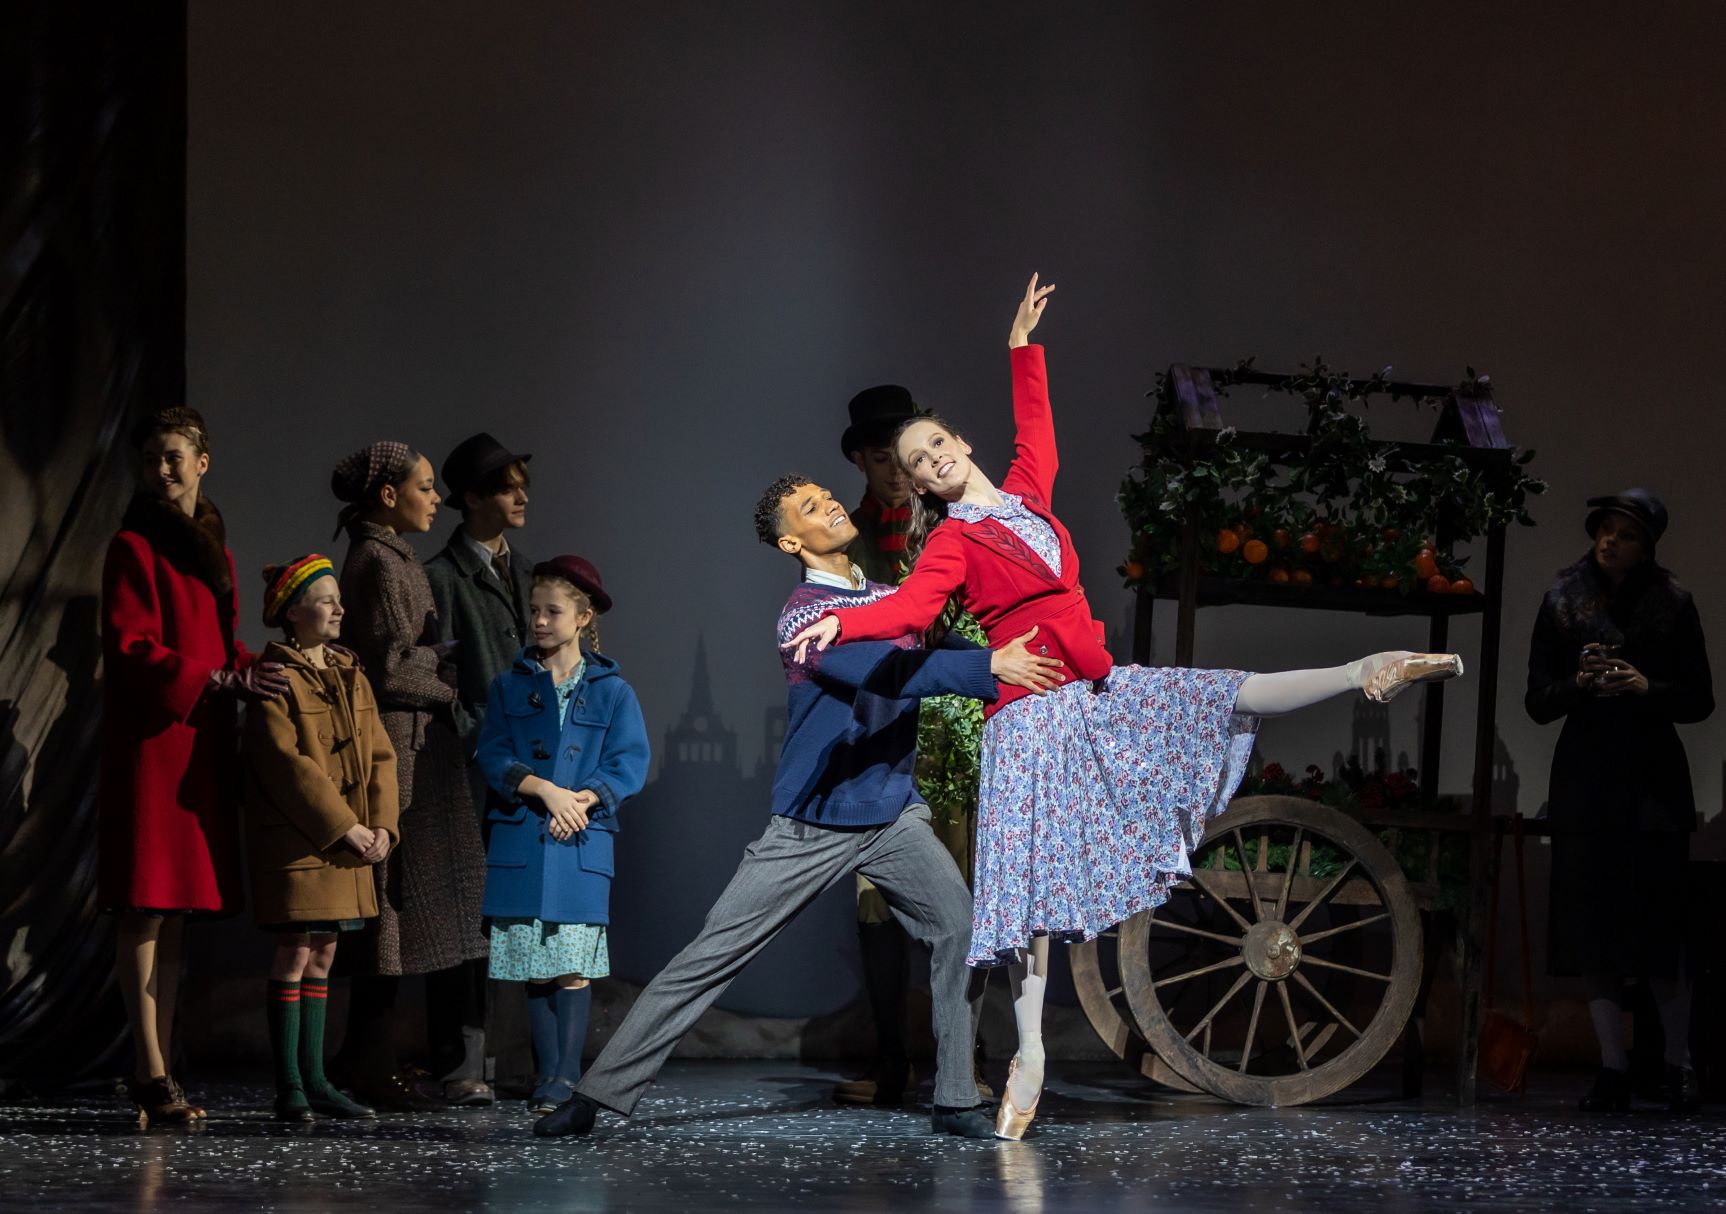 Ballet Theatre UK brings Hans Christian Andersen's classic fairytale, The  Snow Queen at New Theatre Royal, Lincoln